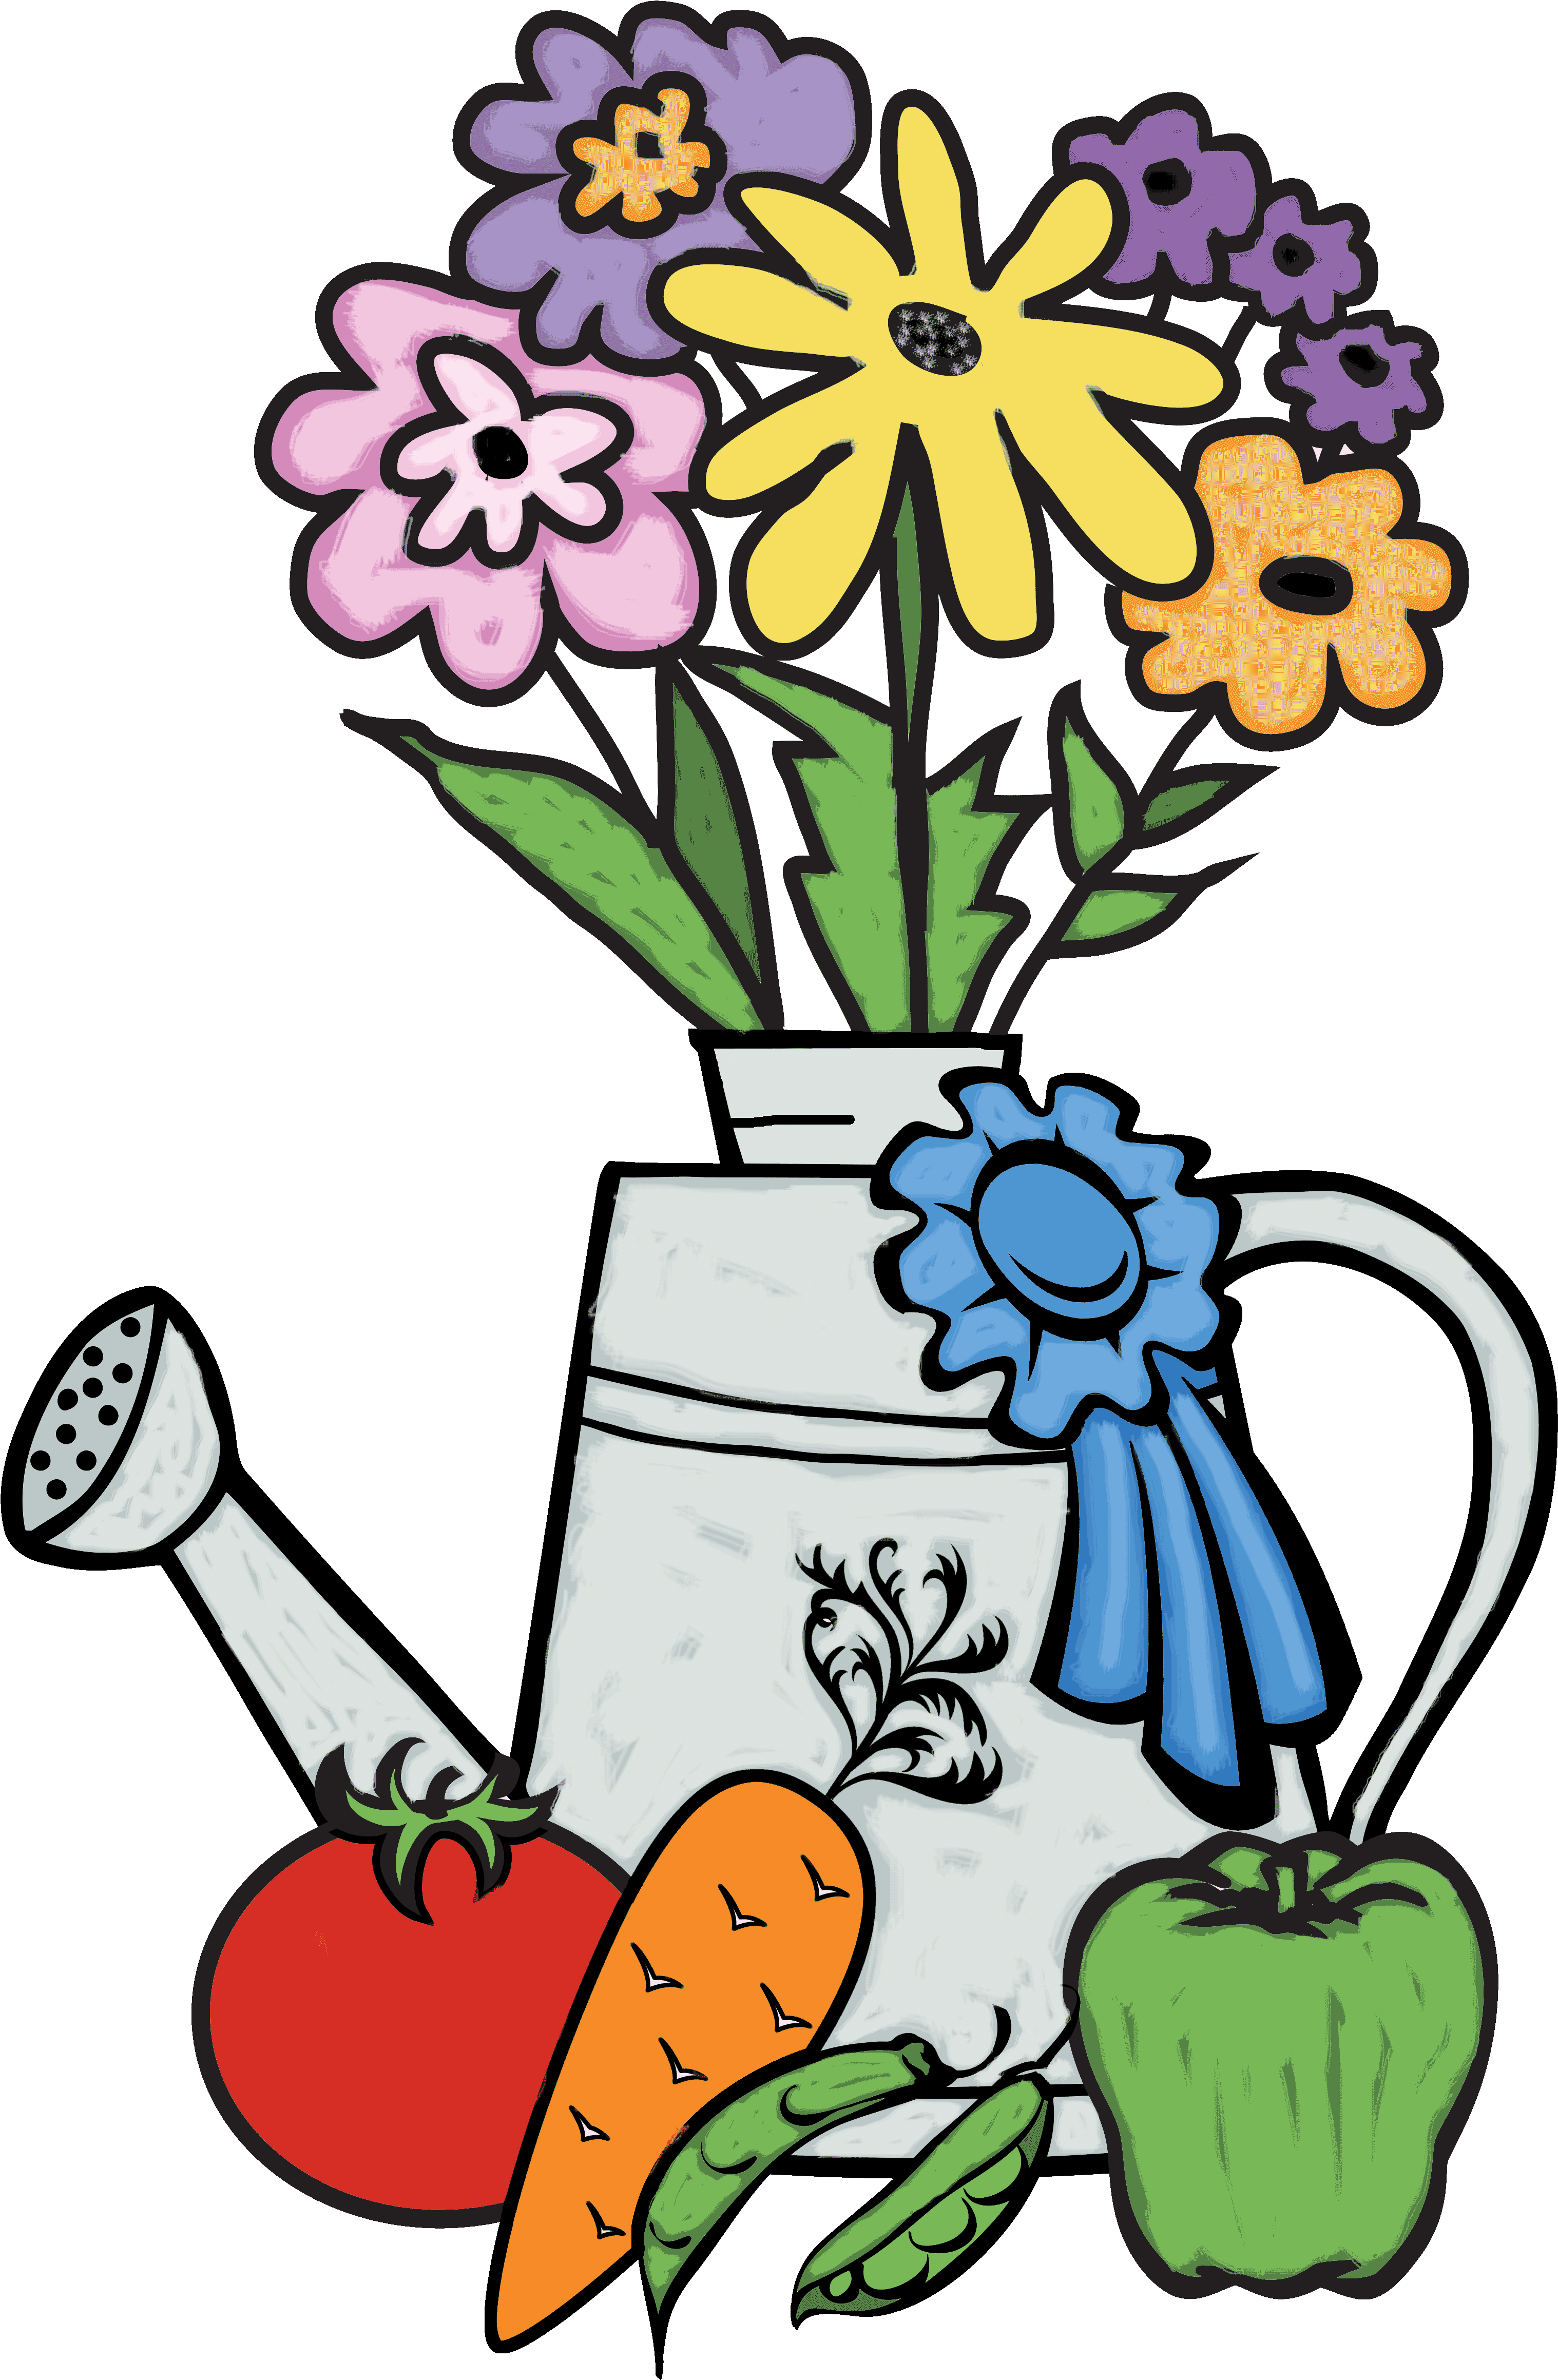 A Drawing Of A Watering Can With Flowers And Vegetables